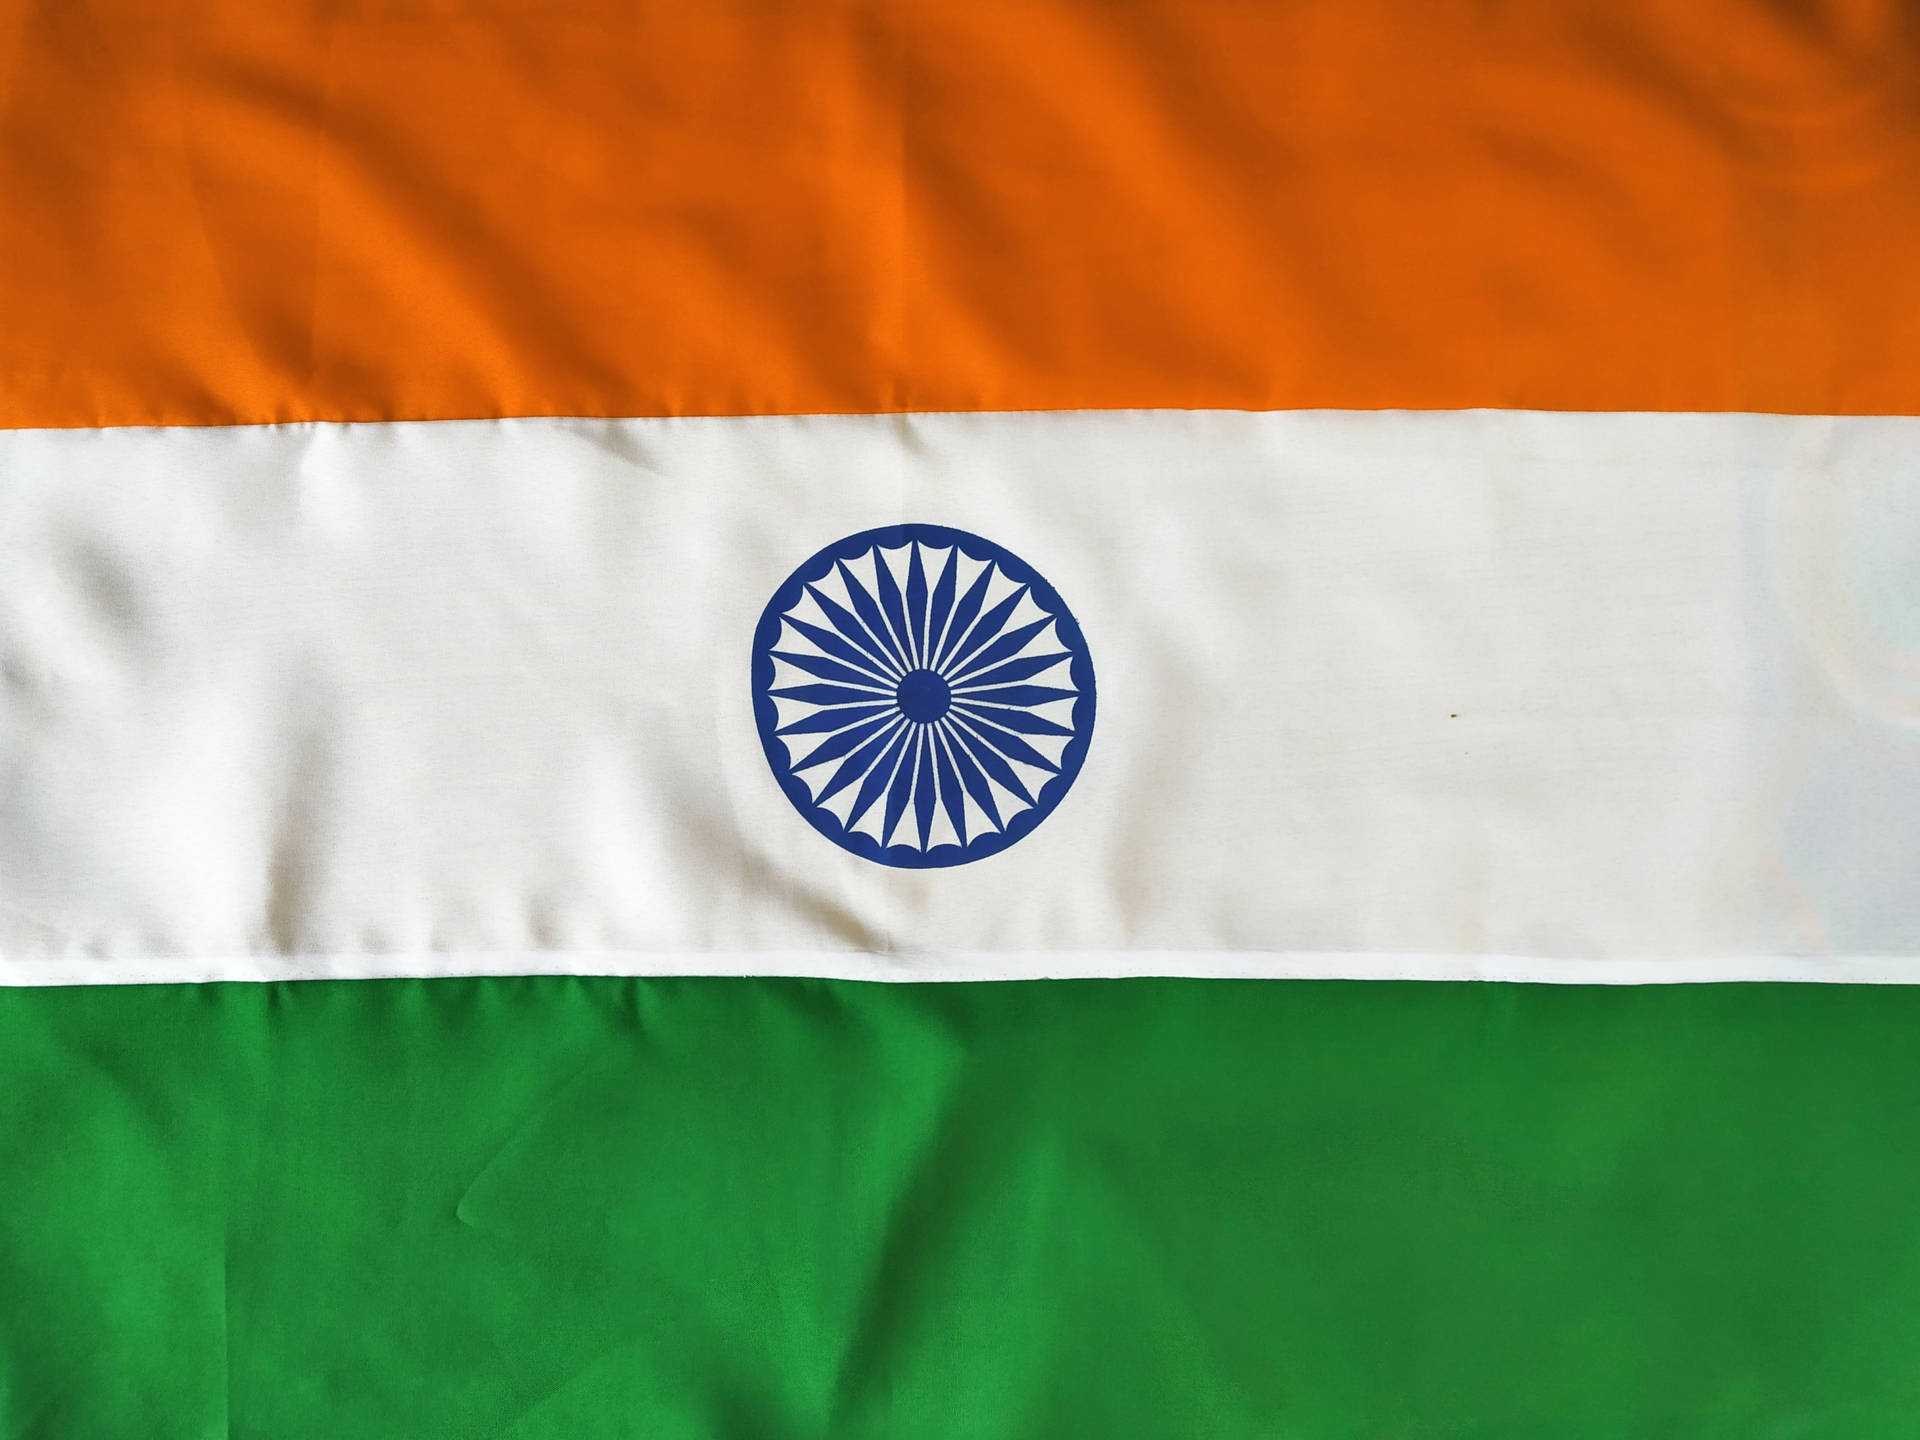 Download wallpapers Indian flag 4k silk wavy flags Asian countries  national symbols Flag of India fabric flags India flag 3D art India  Asia India 3D flag for desktop free Pictures for desktop